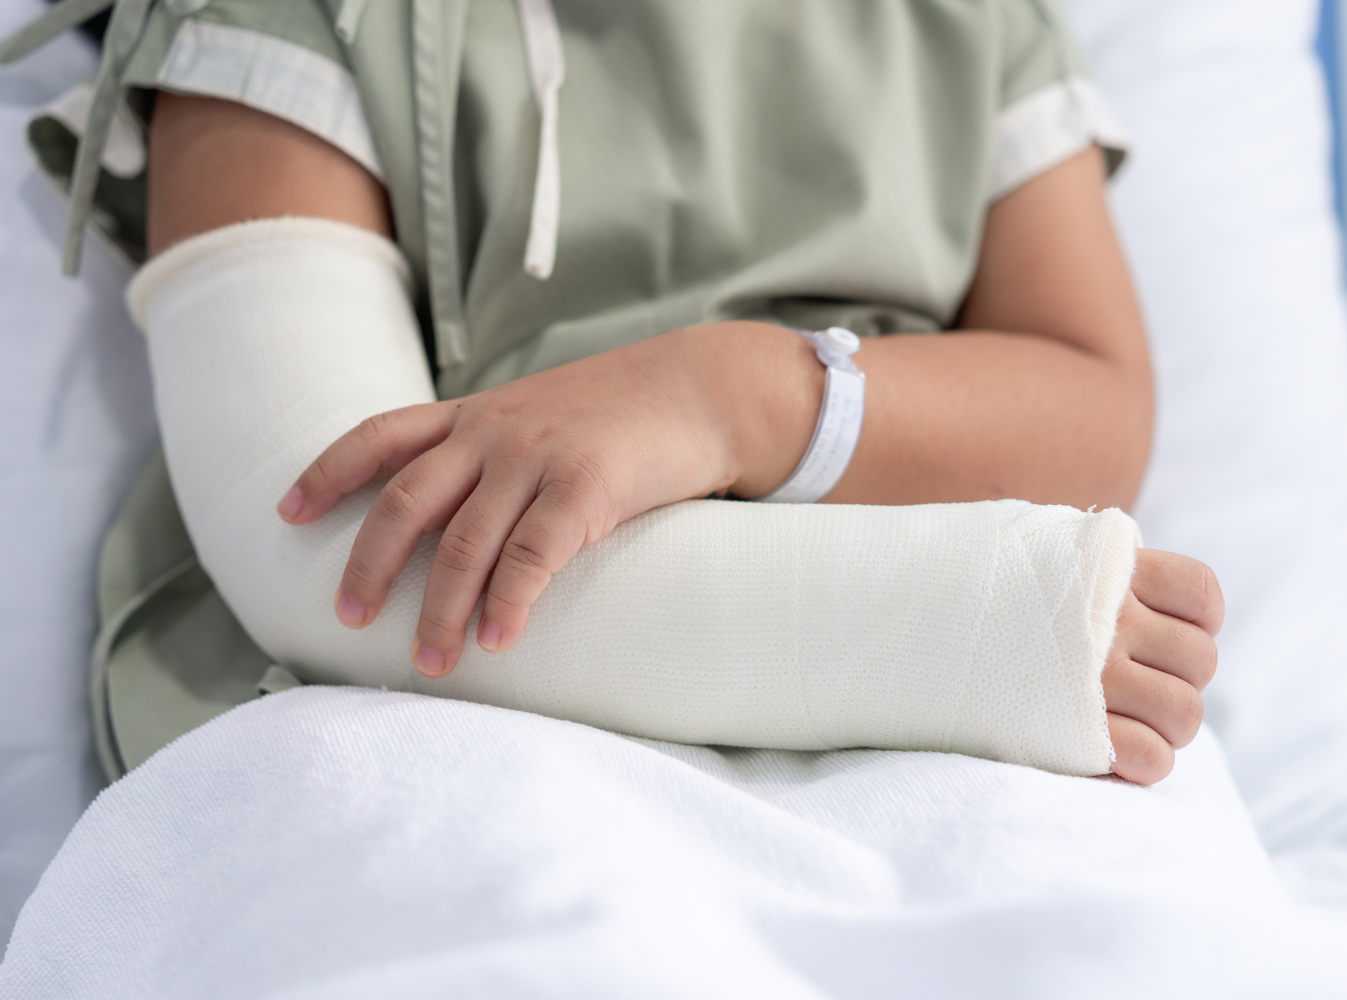 a person in a hospital bed with a cast on their arm